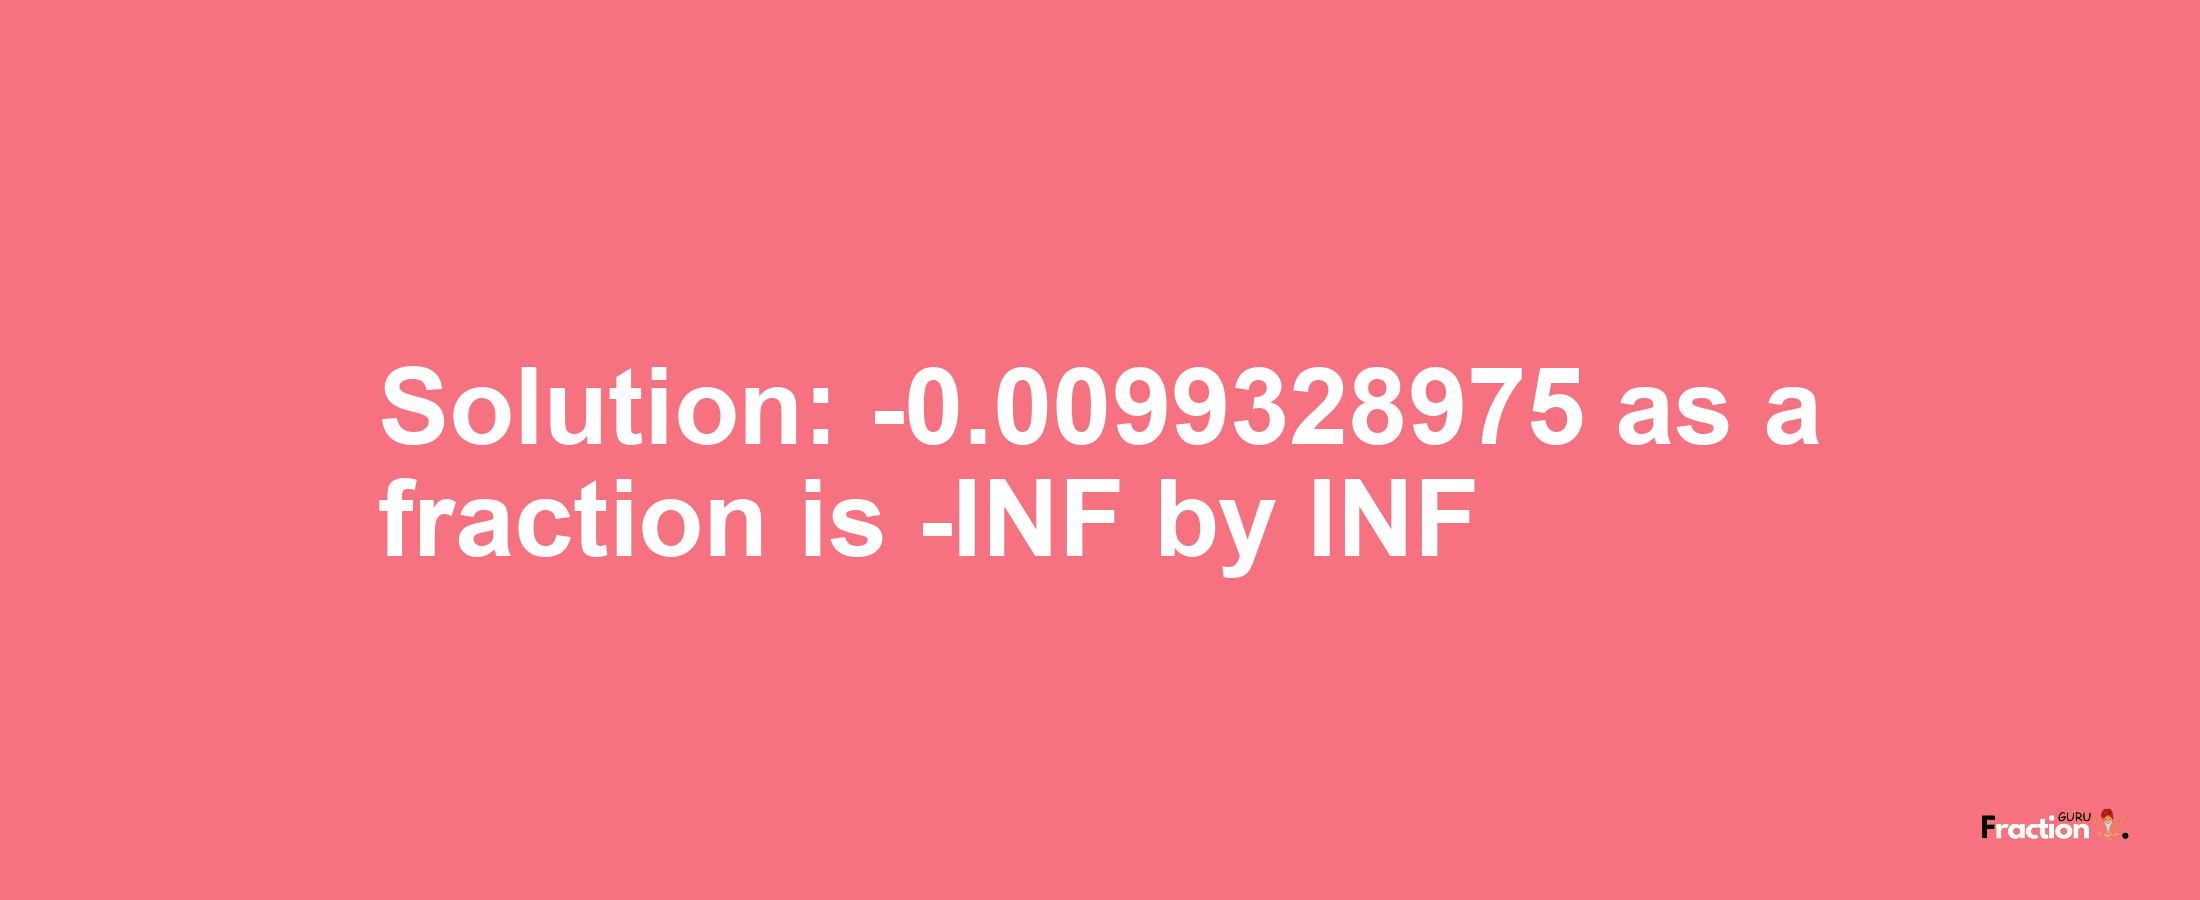 Solution:-0.0099328975 as a fraction is -INF/INF